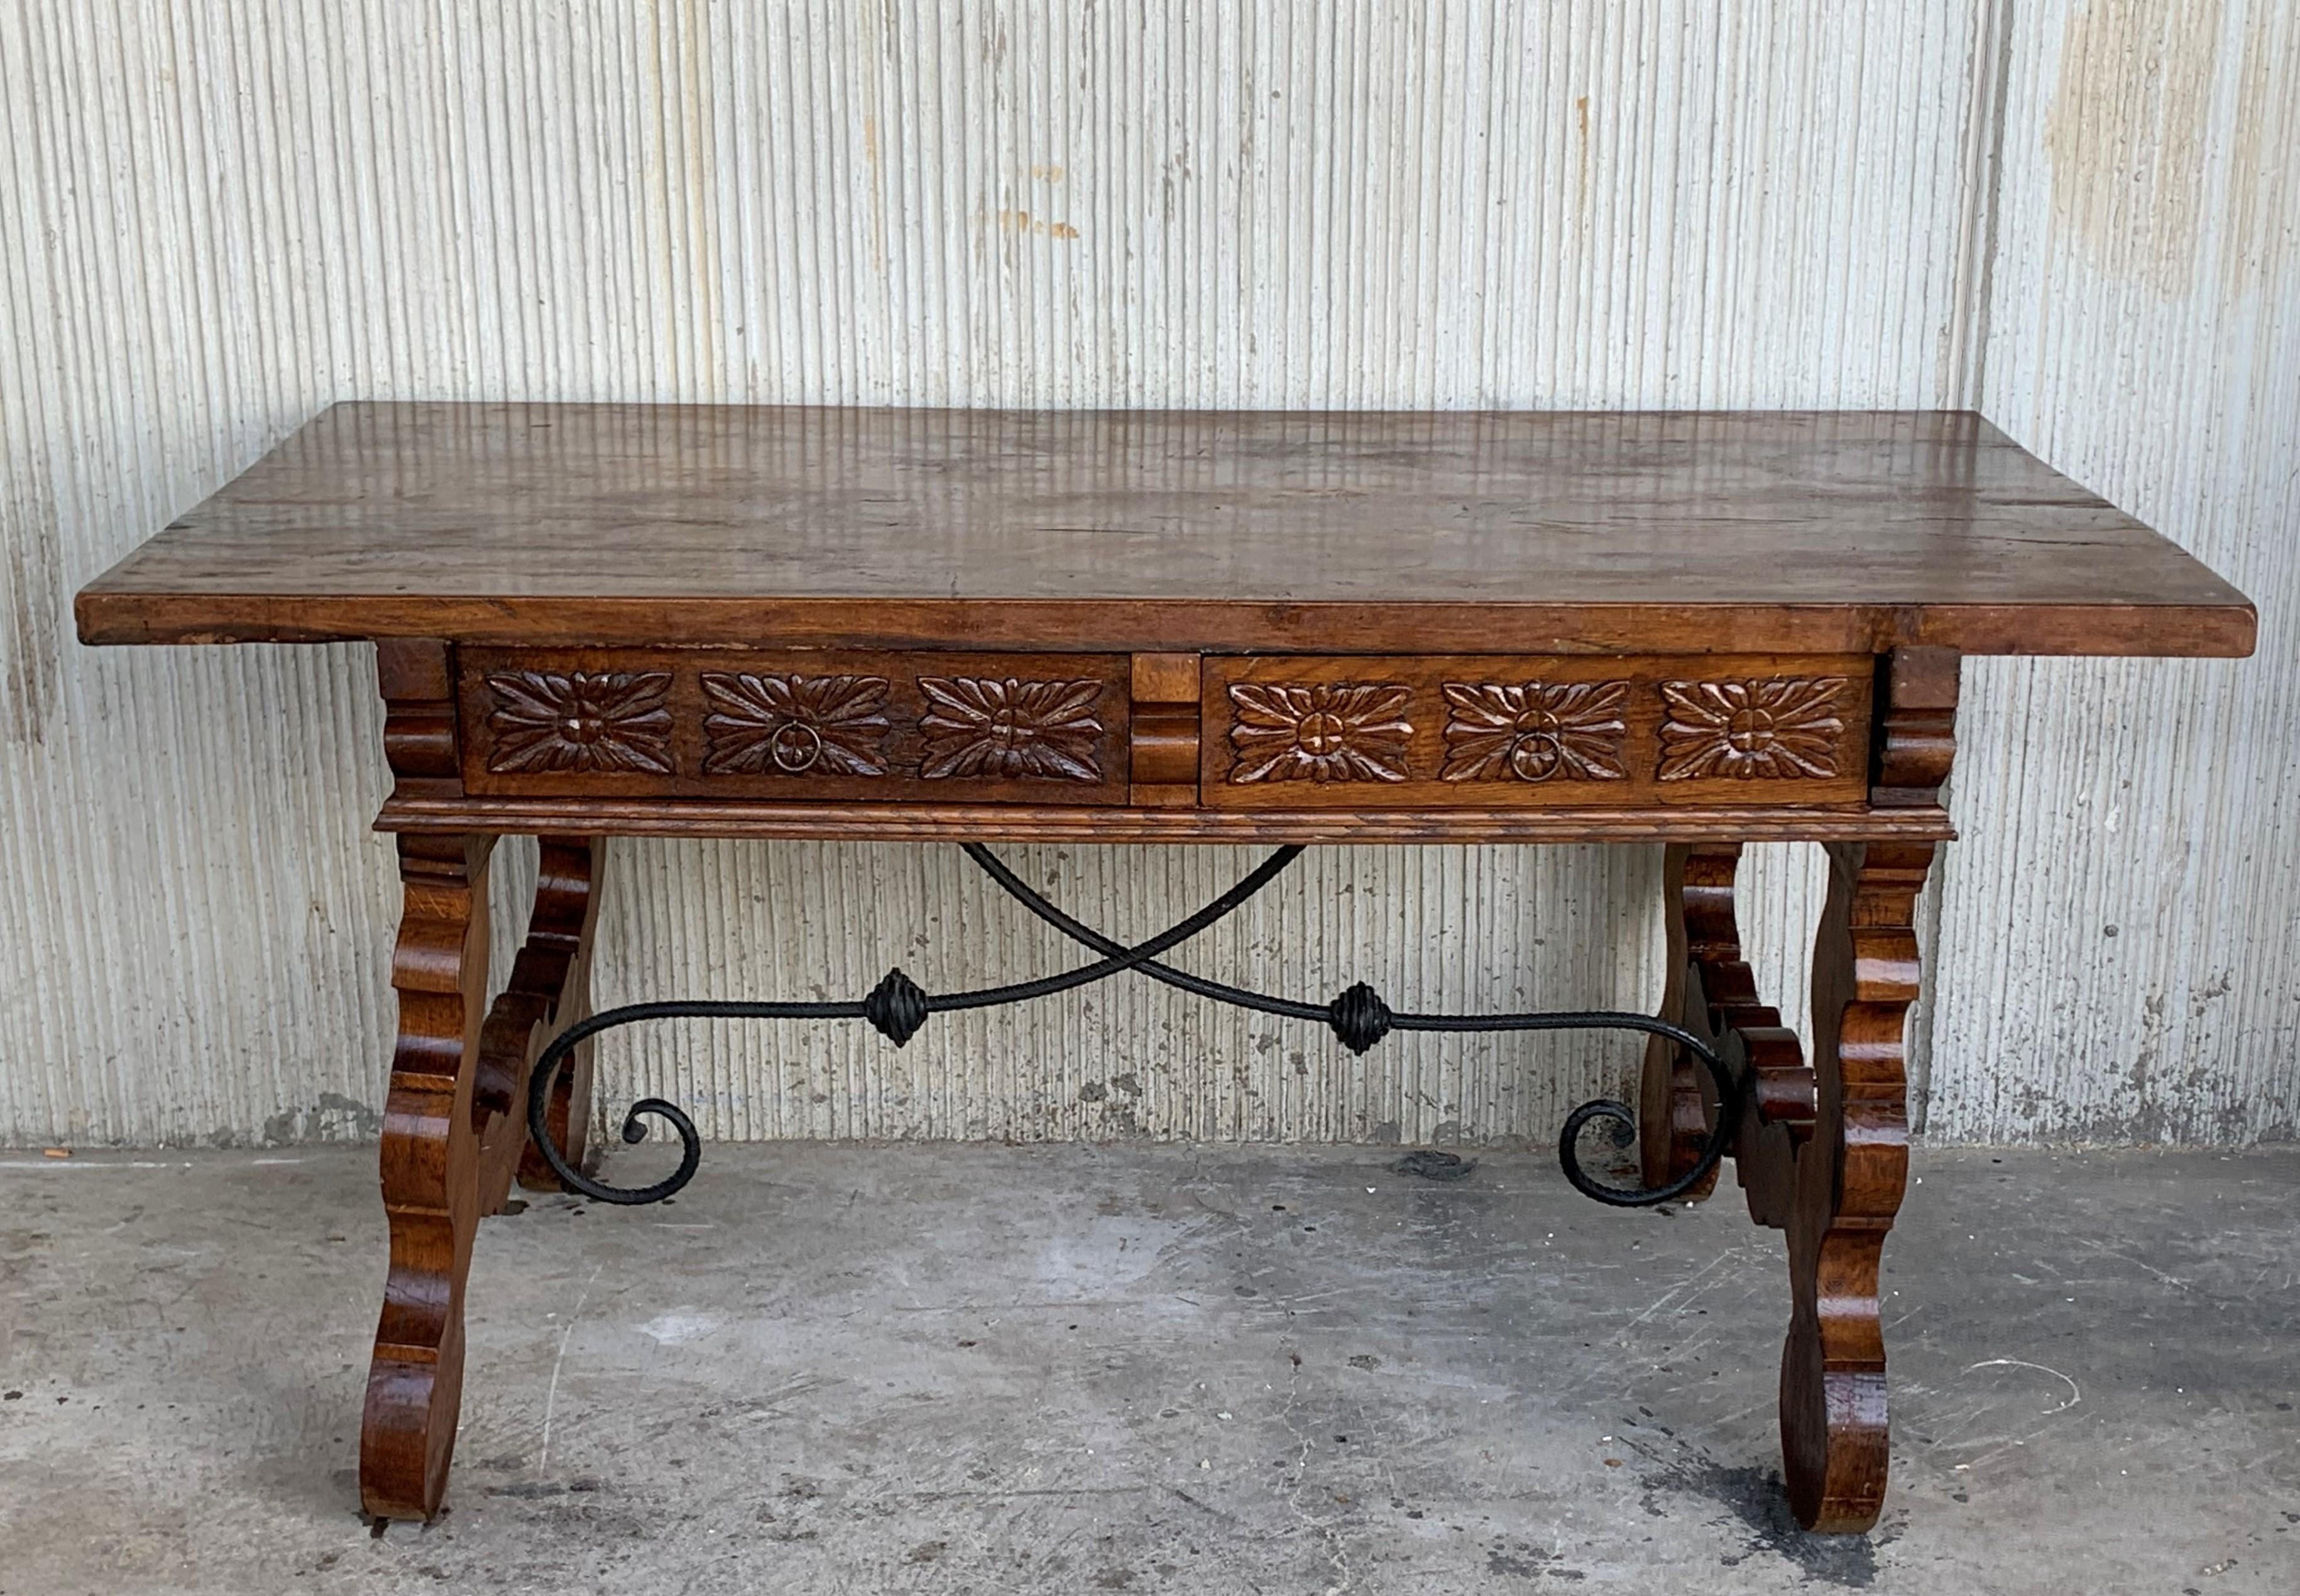 19th century Catalan Spanish desk or console table in carved walnut & iron stretcher with two large drawers and the same carved in the back of the desk.
Very heavy and resistant, ready for use.

Measures: Height to the top 29.92in
Height to the